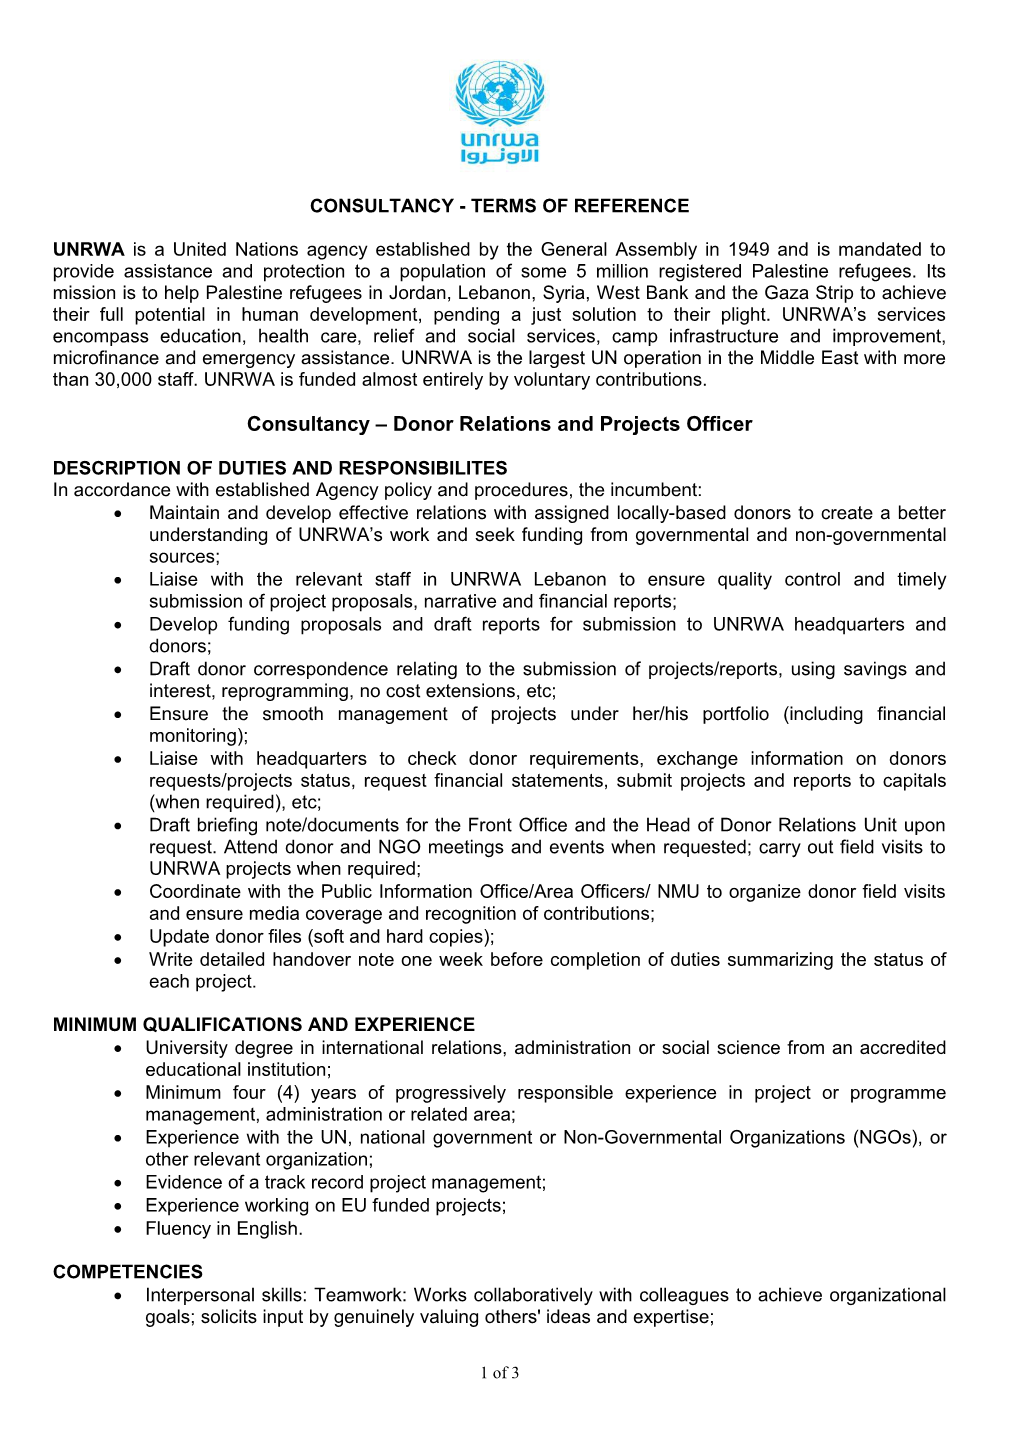 Consultancy Donor Relations and Projects Officer